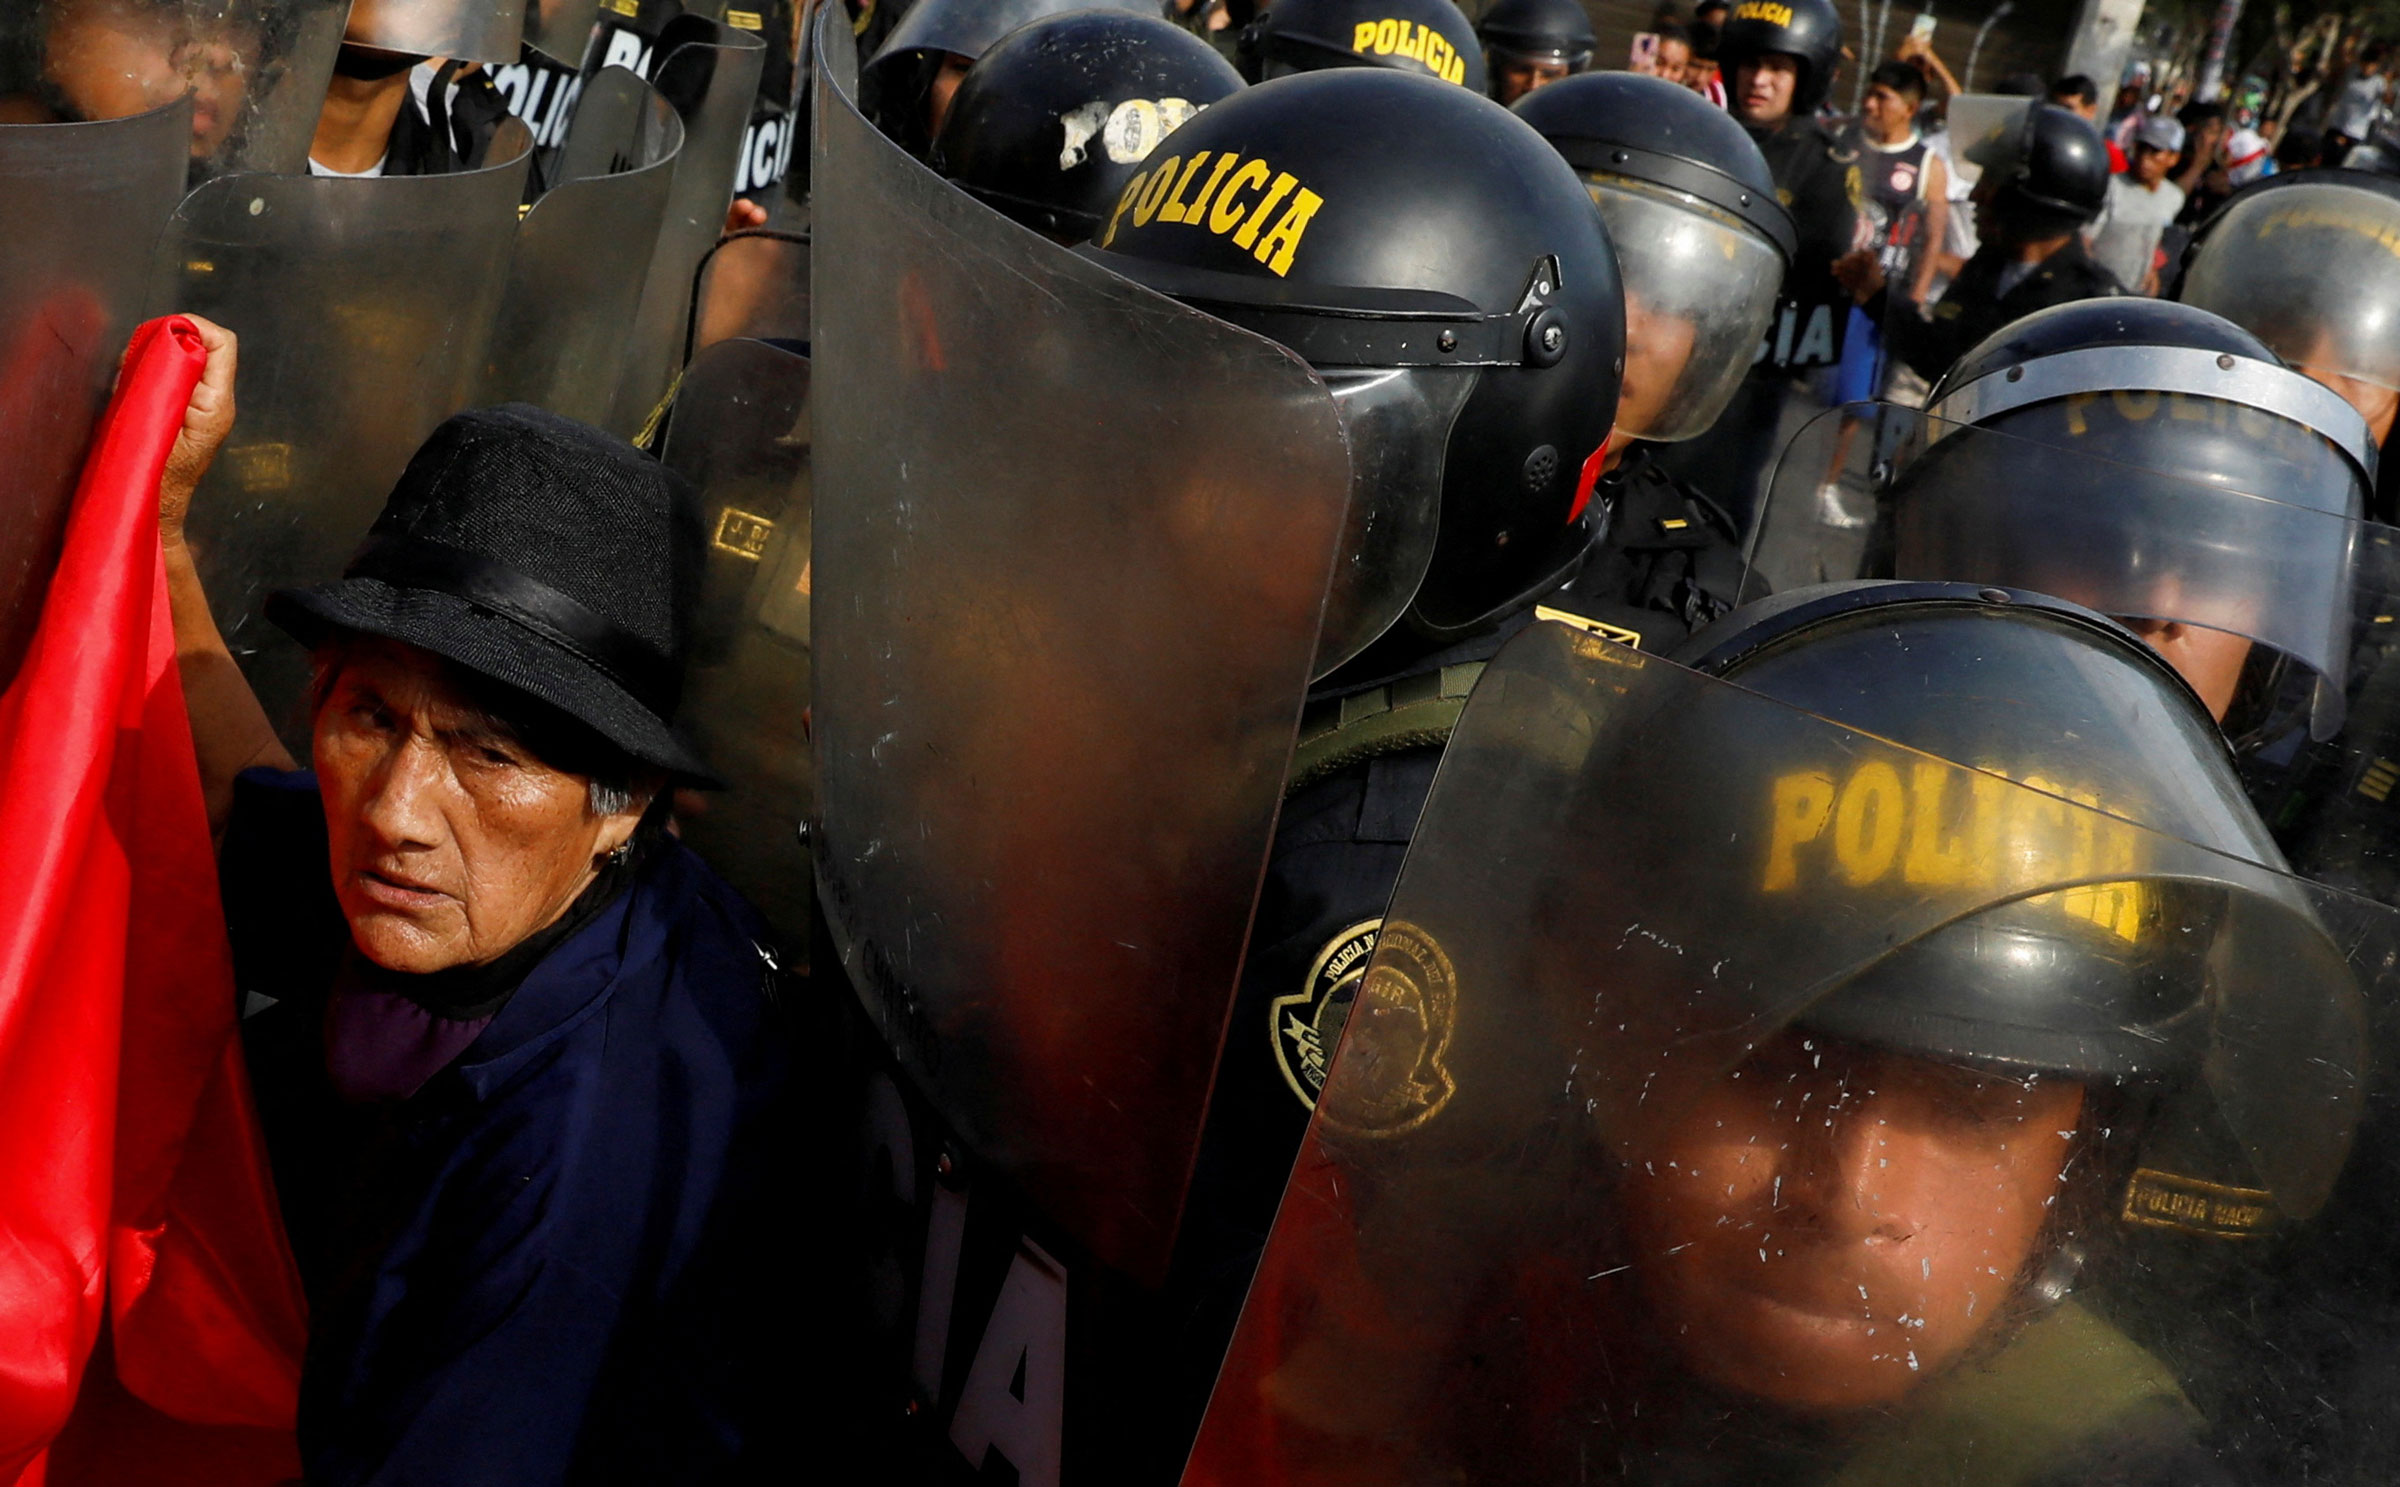 A protester interacts with police during the ‘Take over Lima’ march to demonstrate against Peru’s President Dina Boluarte, following the ousting and arrest of former President Pedro Castillo, in Lima on Jan. 19, 2023. (Alessandro Cinque—Reuters)